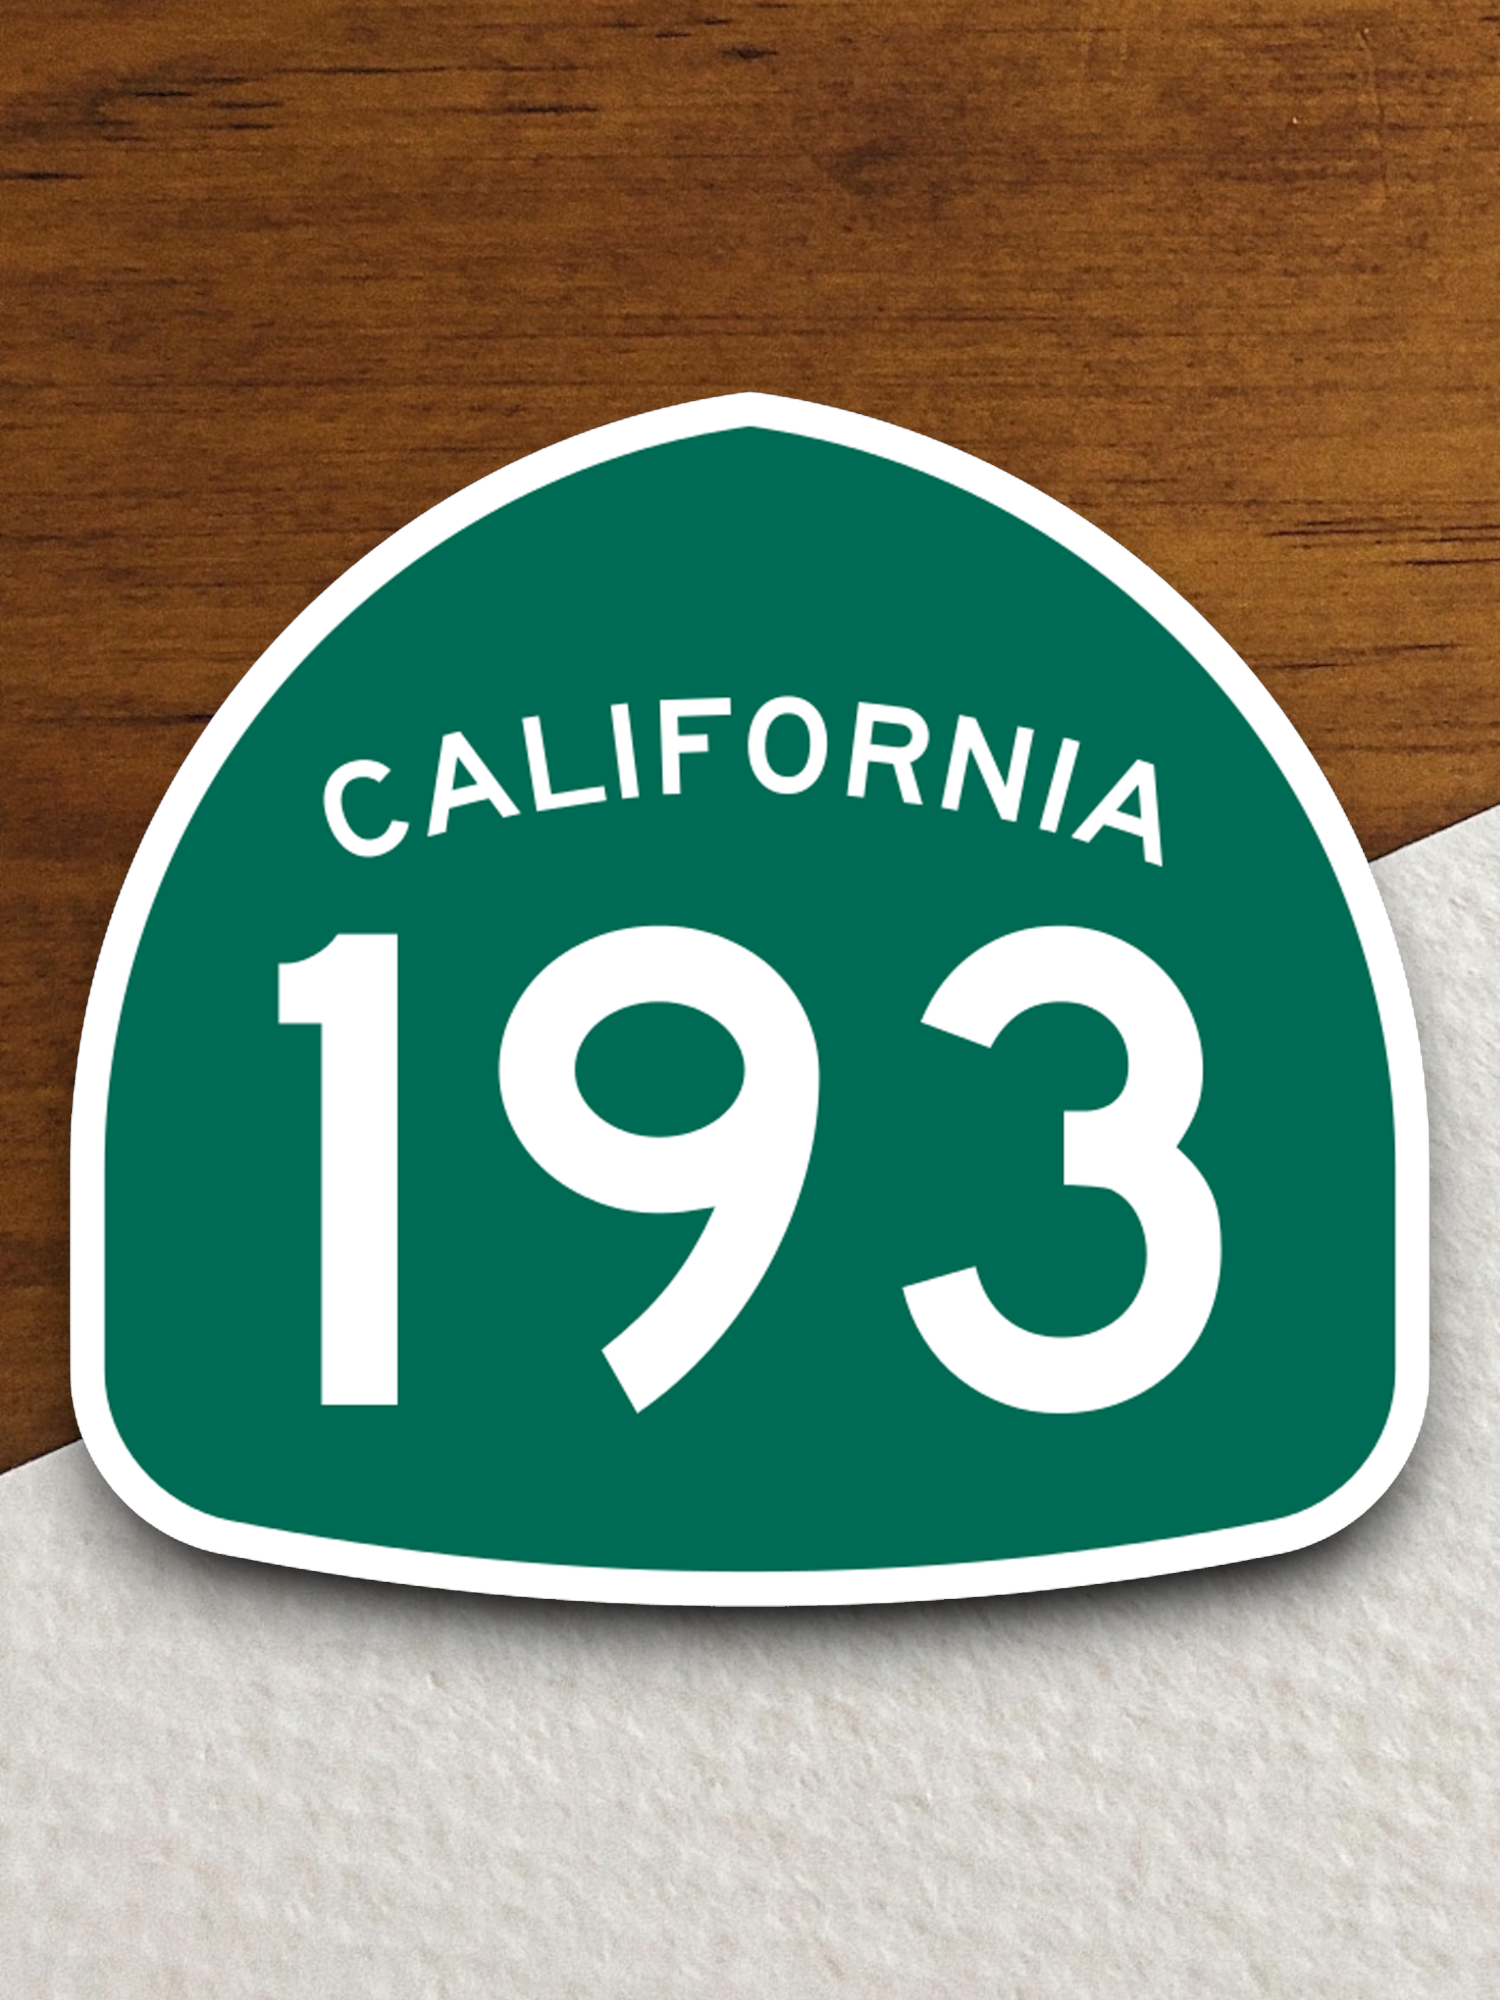 California State Route 193 Road Sign Sticker